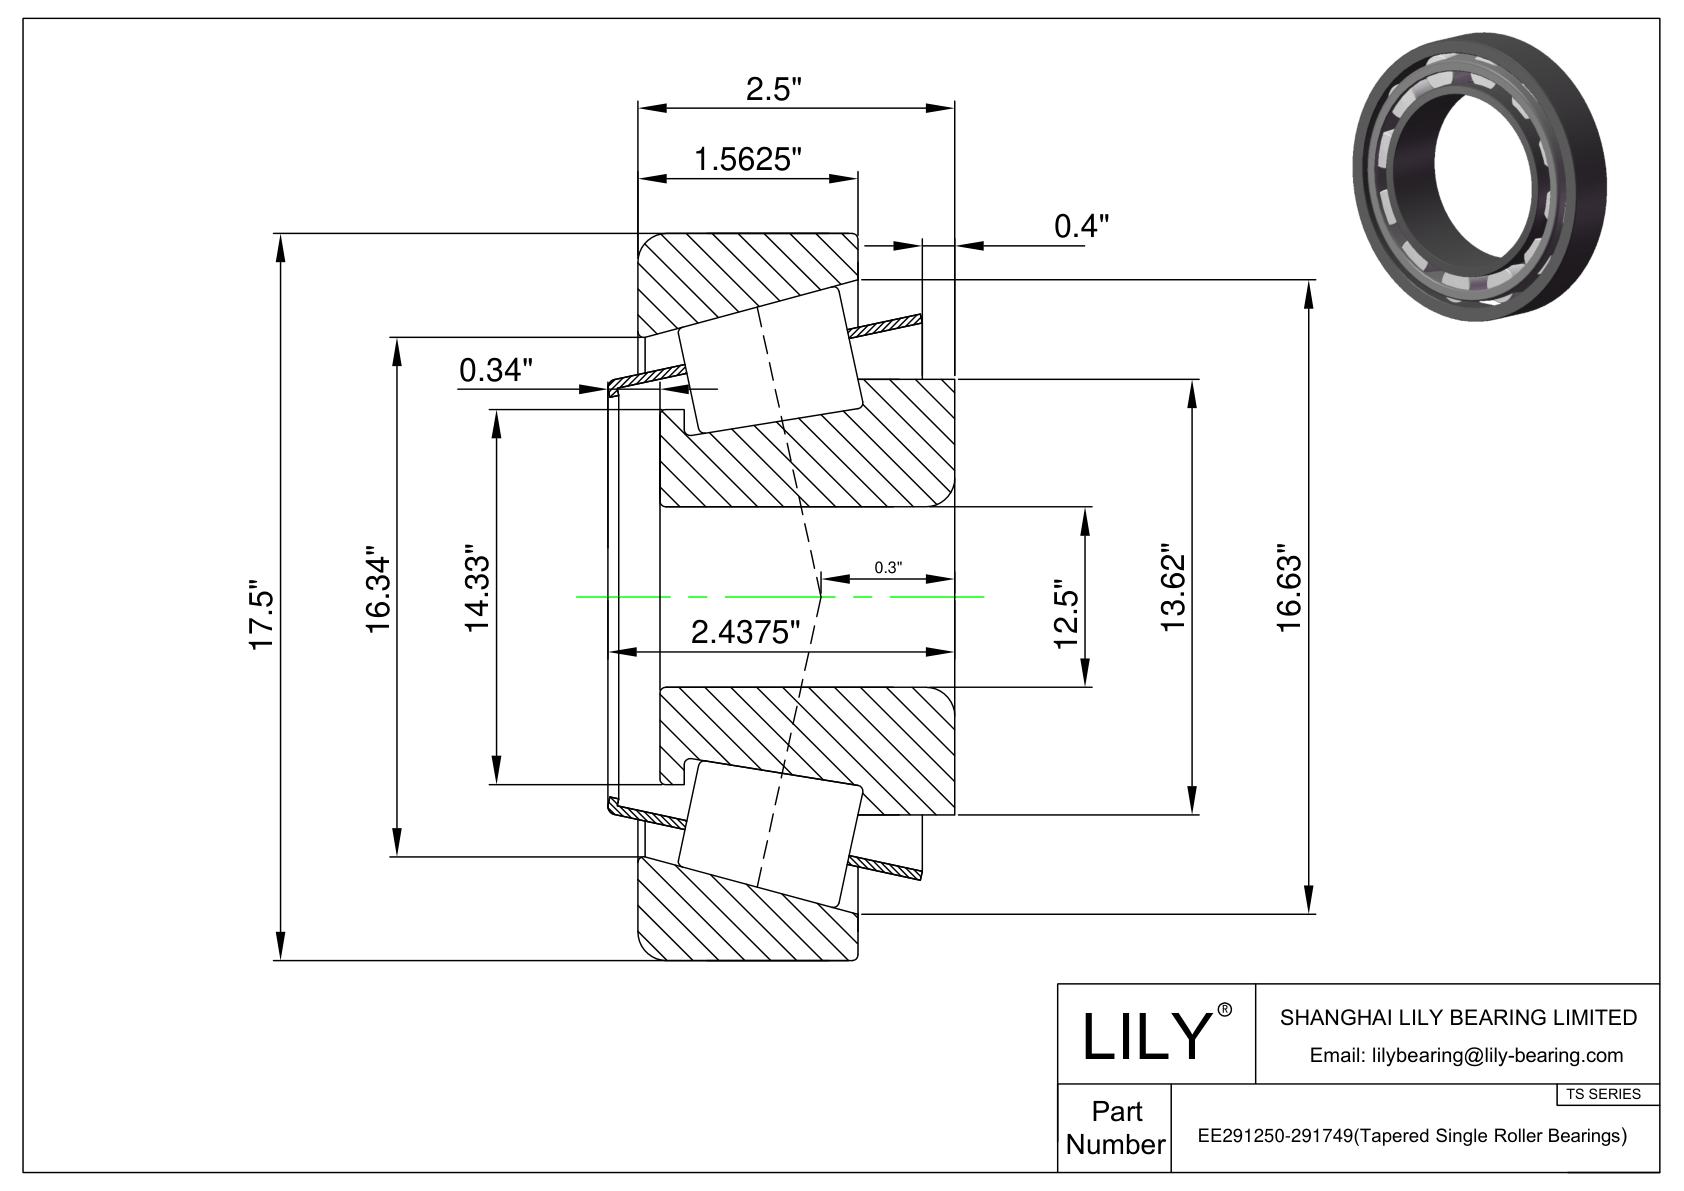 EE291250-291749 TS (Tapered Single Roller Bearings) (Imperial) cad drawing